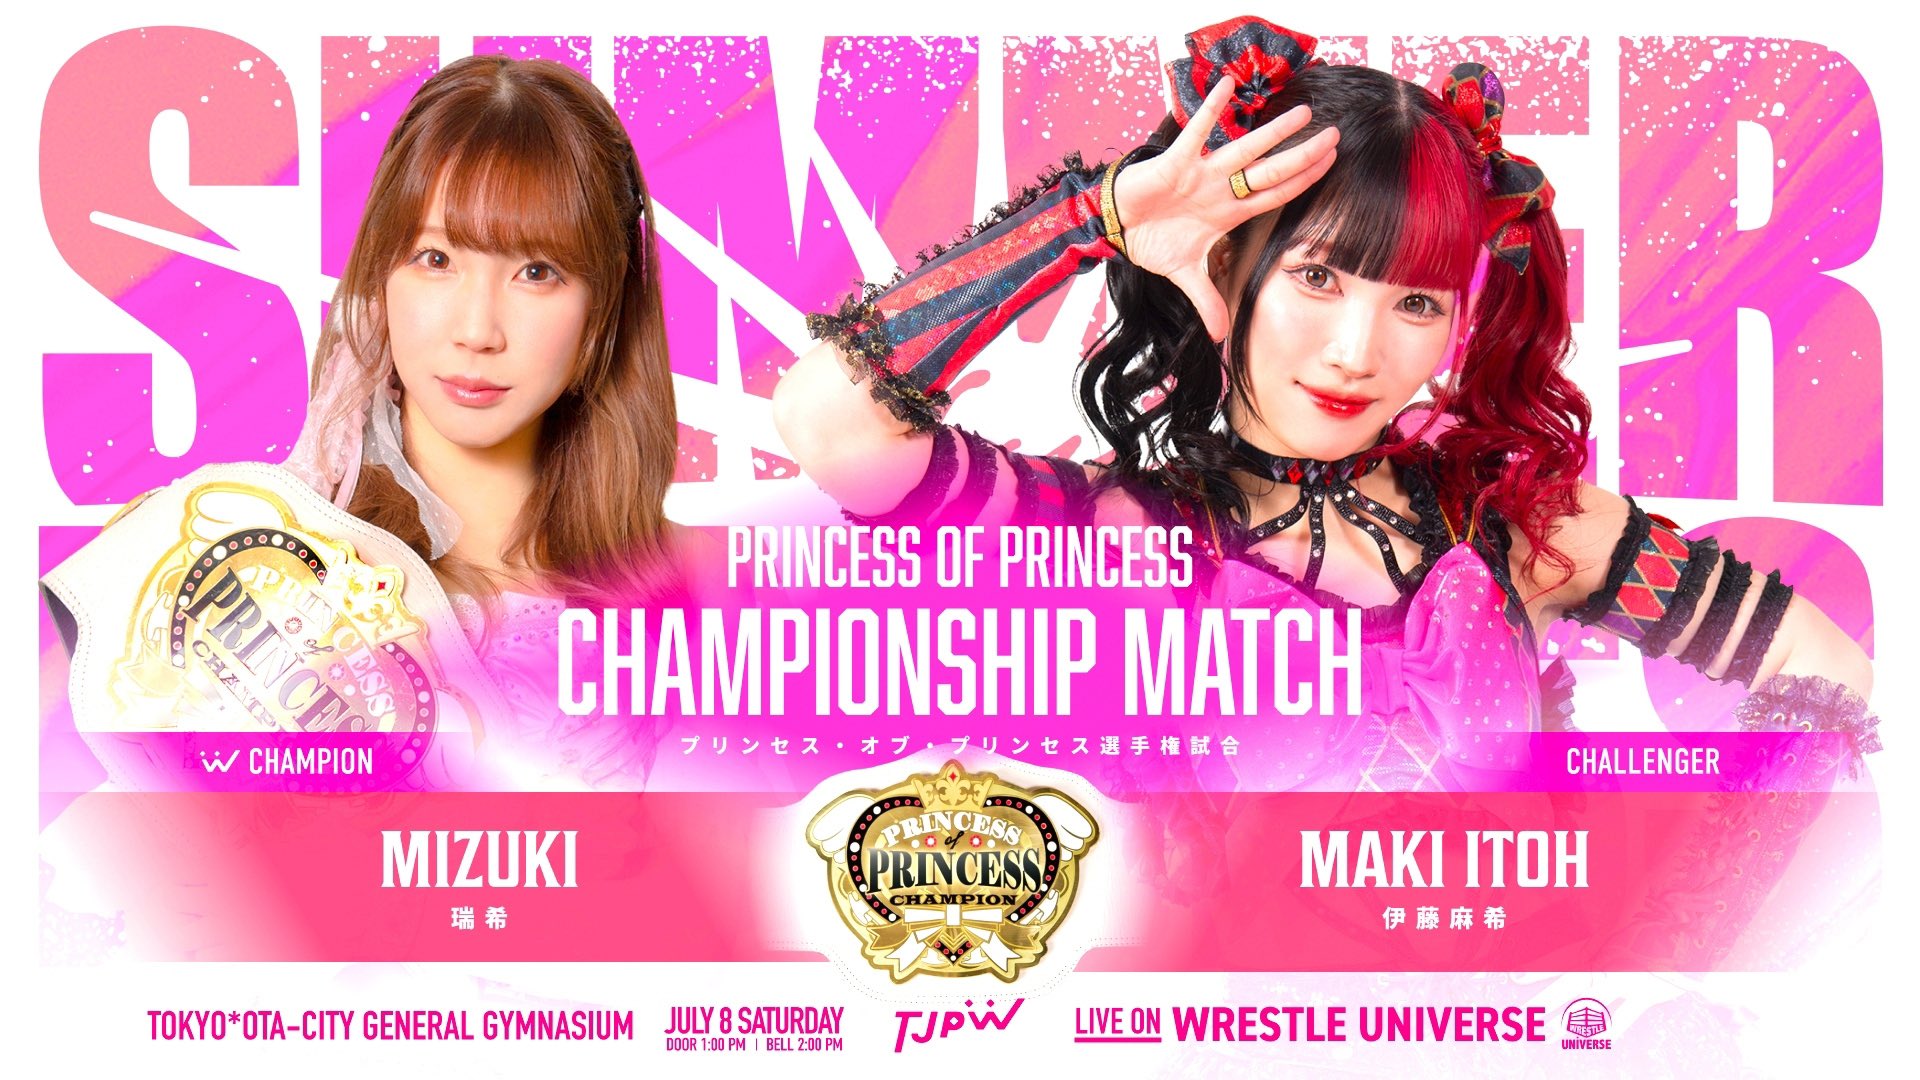 The Pro Wrestling Schedule is headlined by TJPW's Summer Sun Princess !